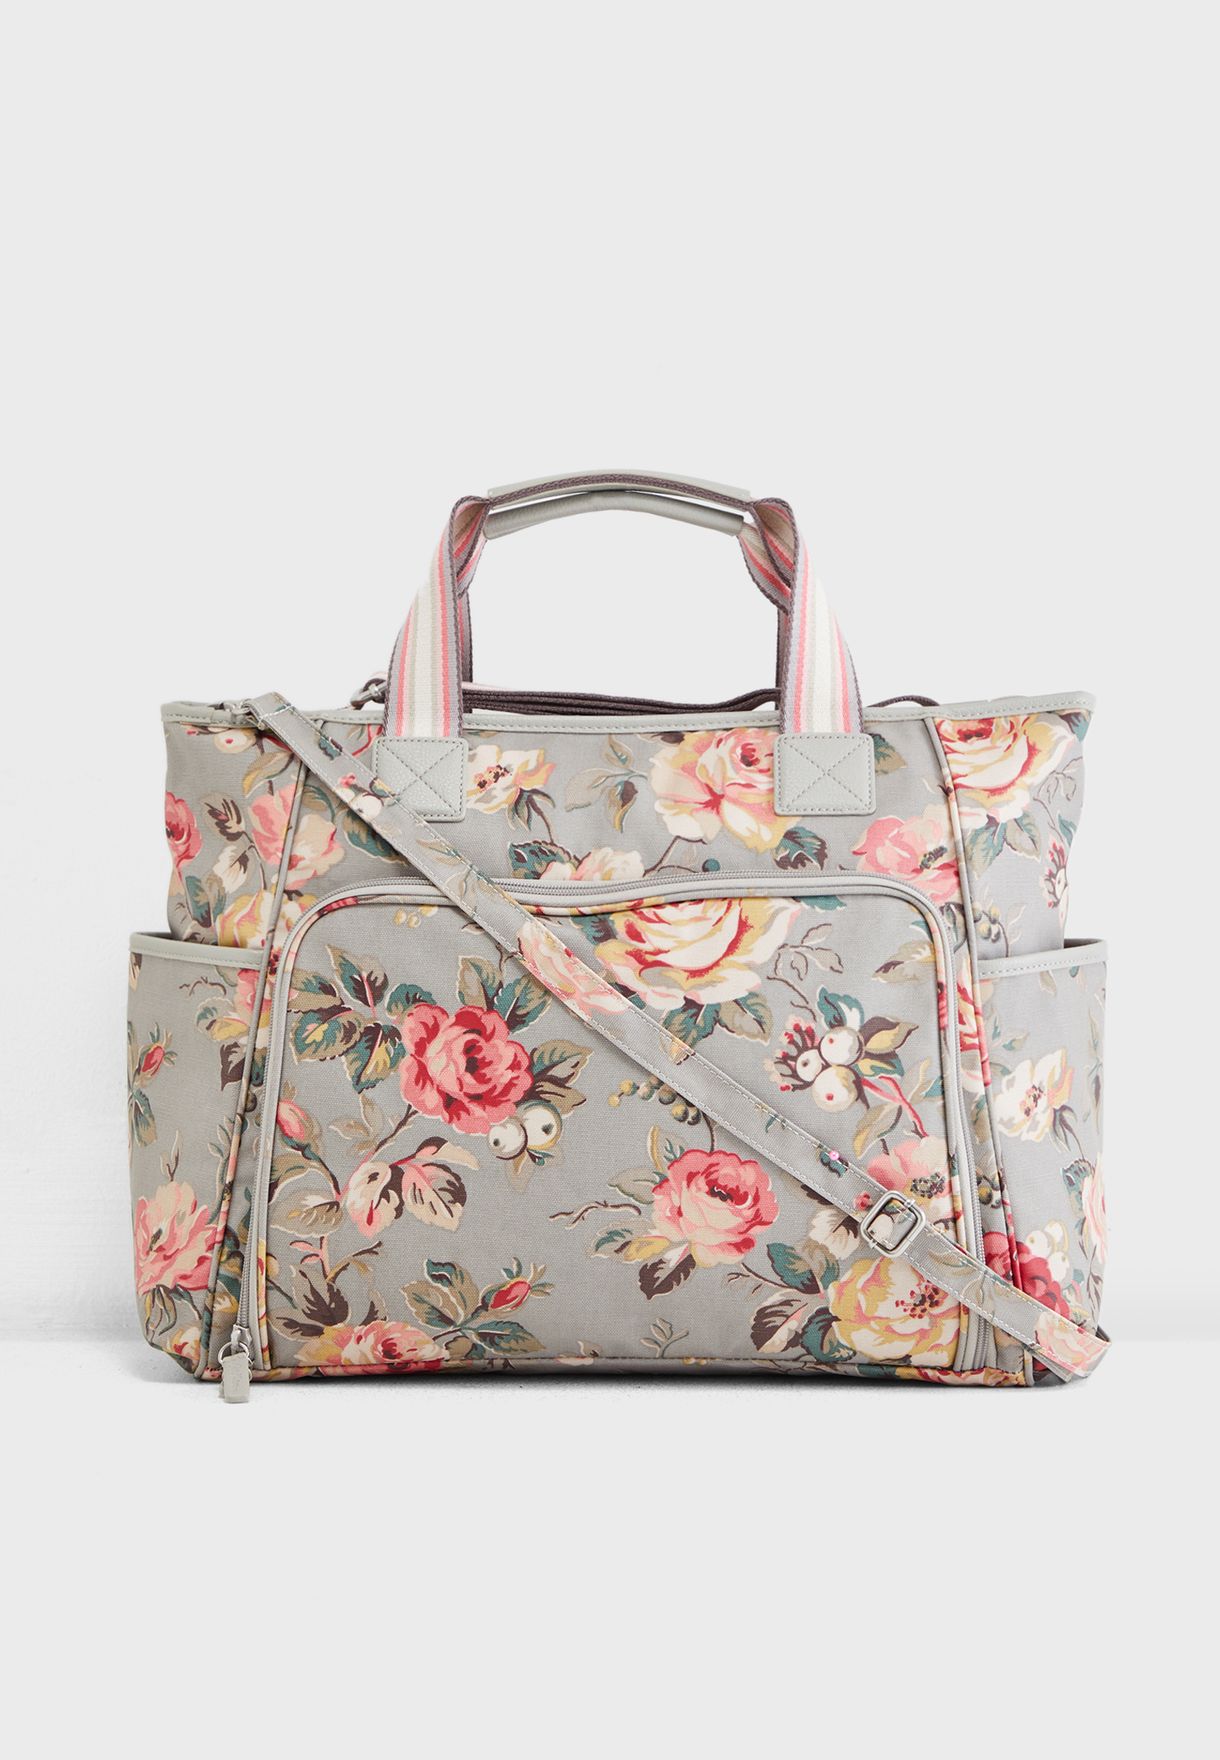 Cath Kidston prints Carry All Nappy Bag 